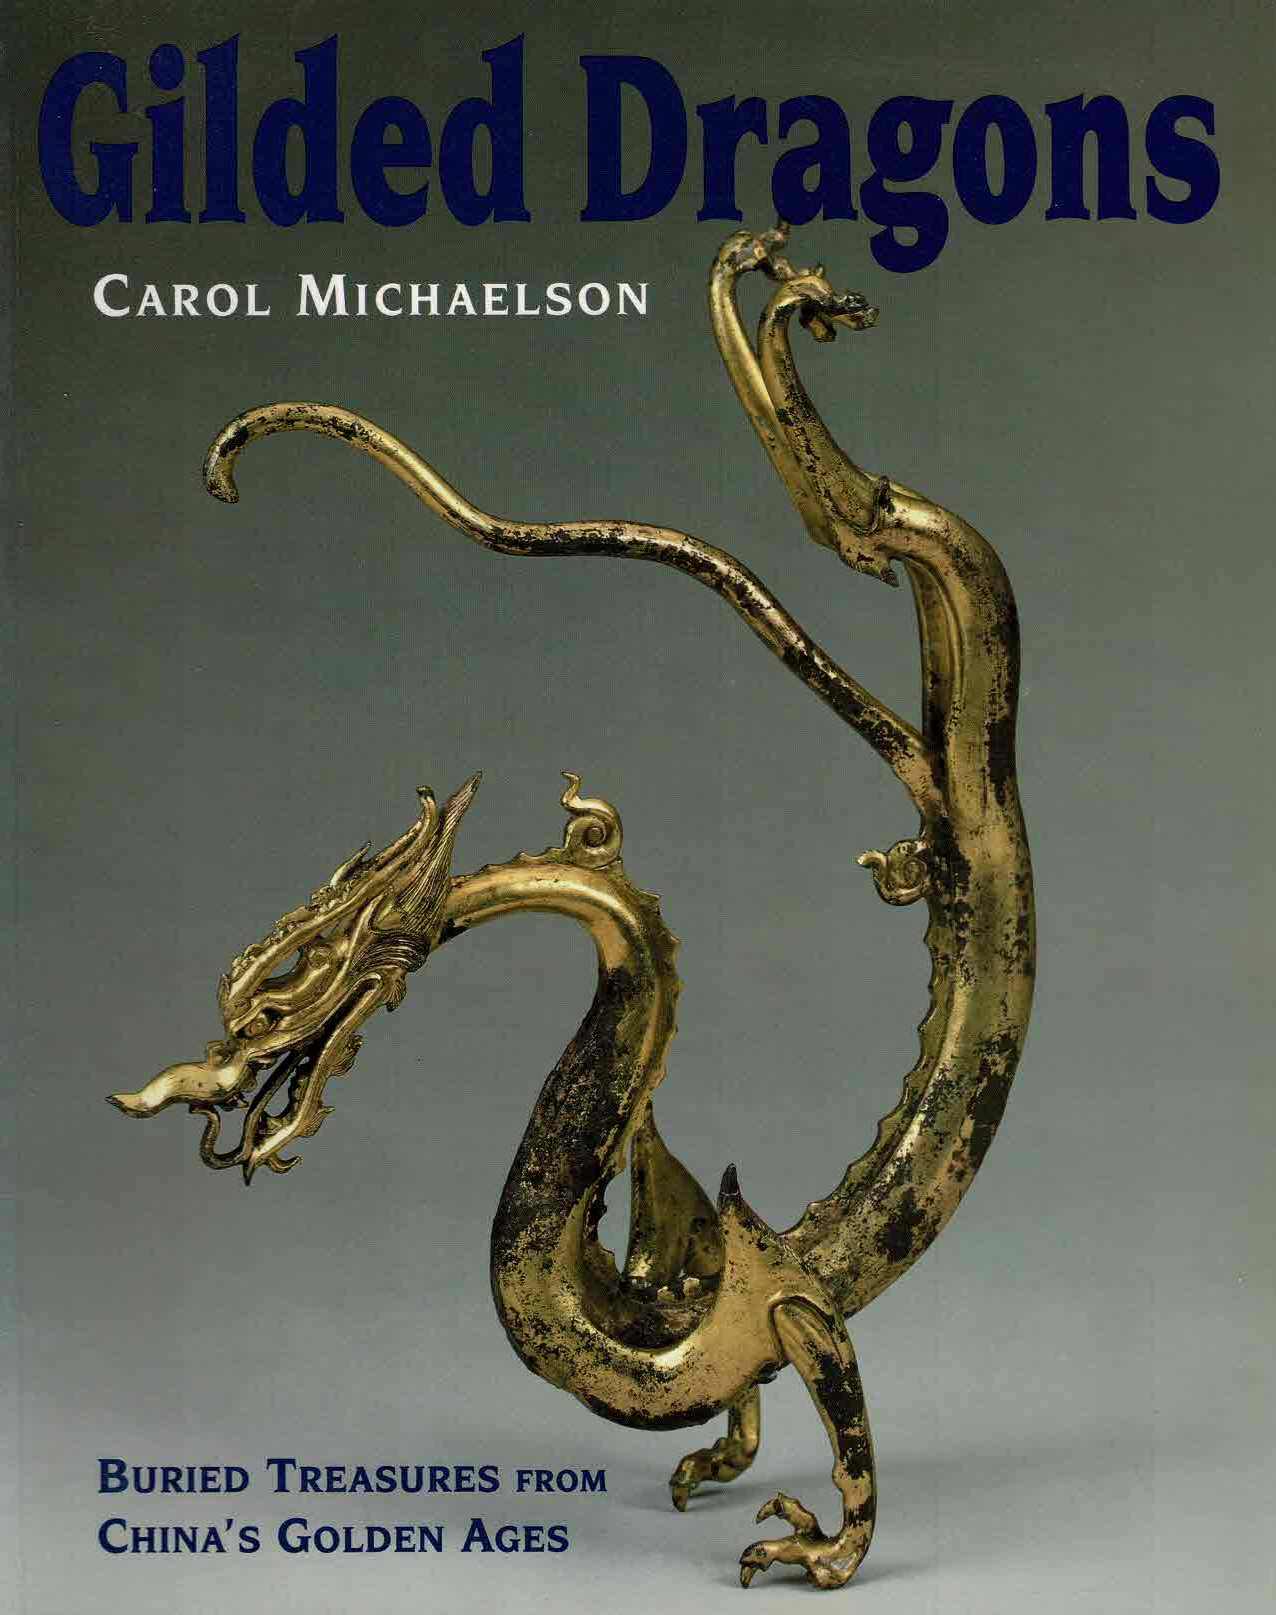 Michaelson, Carol - Gilded Dragons. Buried Treasures from China's Golden Ages